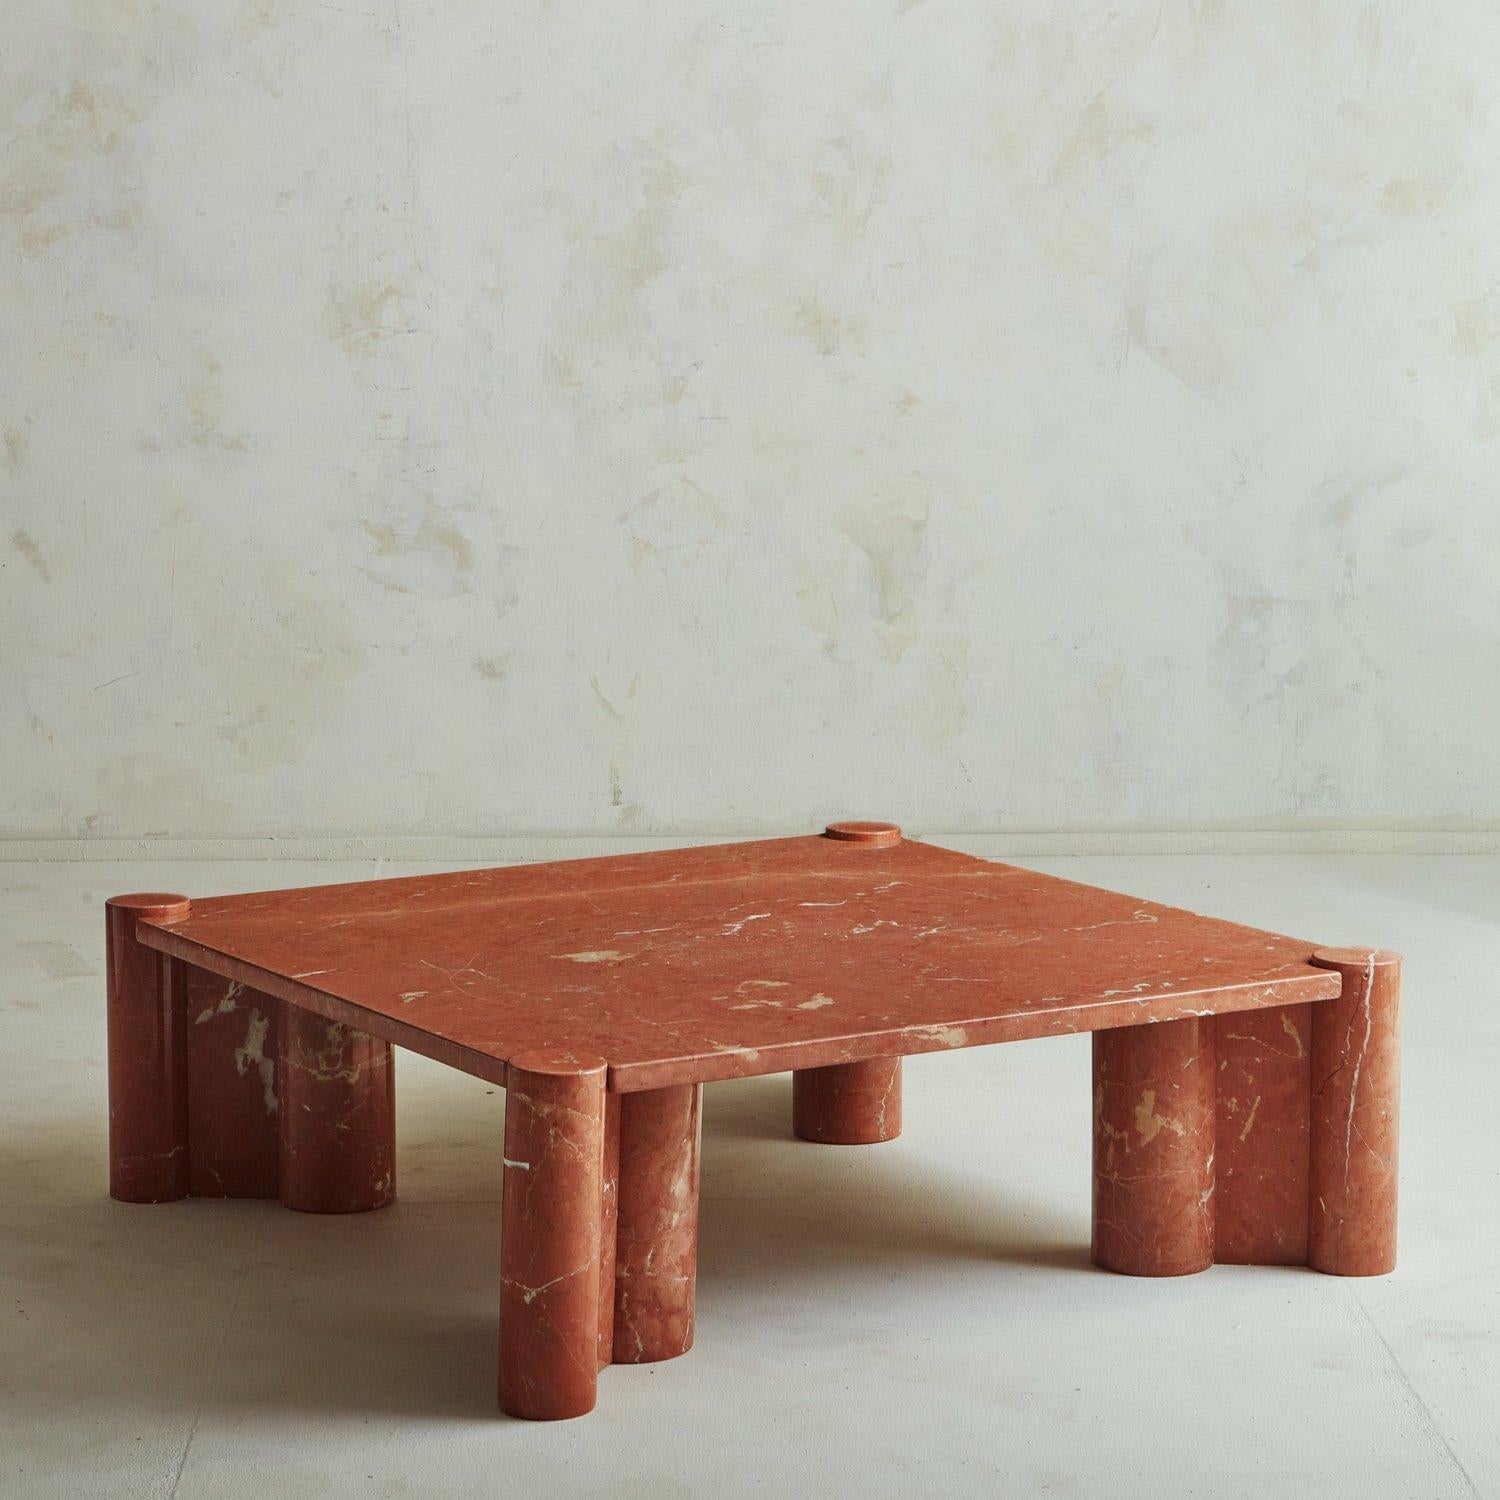 A 1960s ‘Jumbo’ coffee table attributed to Gae Aulenti for Knoll International. This monumental table was constructed with red Rosso Alicante marble and has gorgeous cream and white veining. Unmarked. Sourced in France, 1960s

We also have another